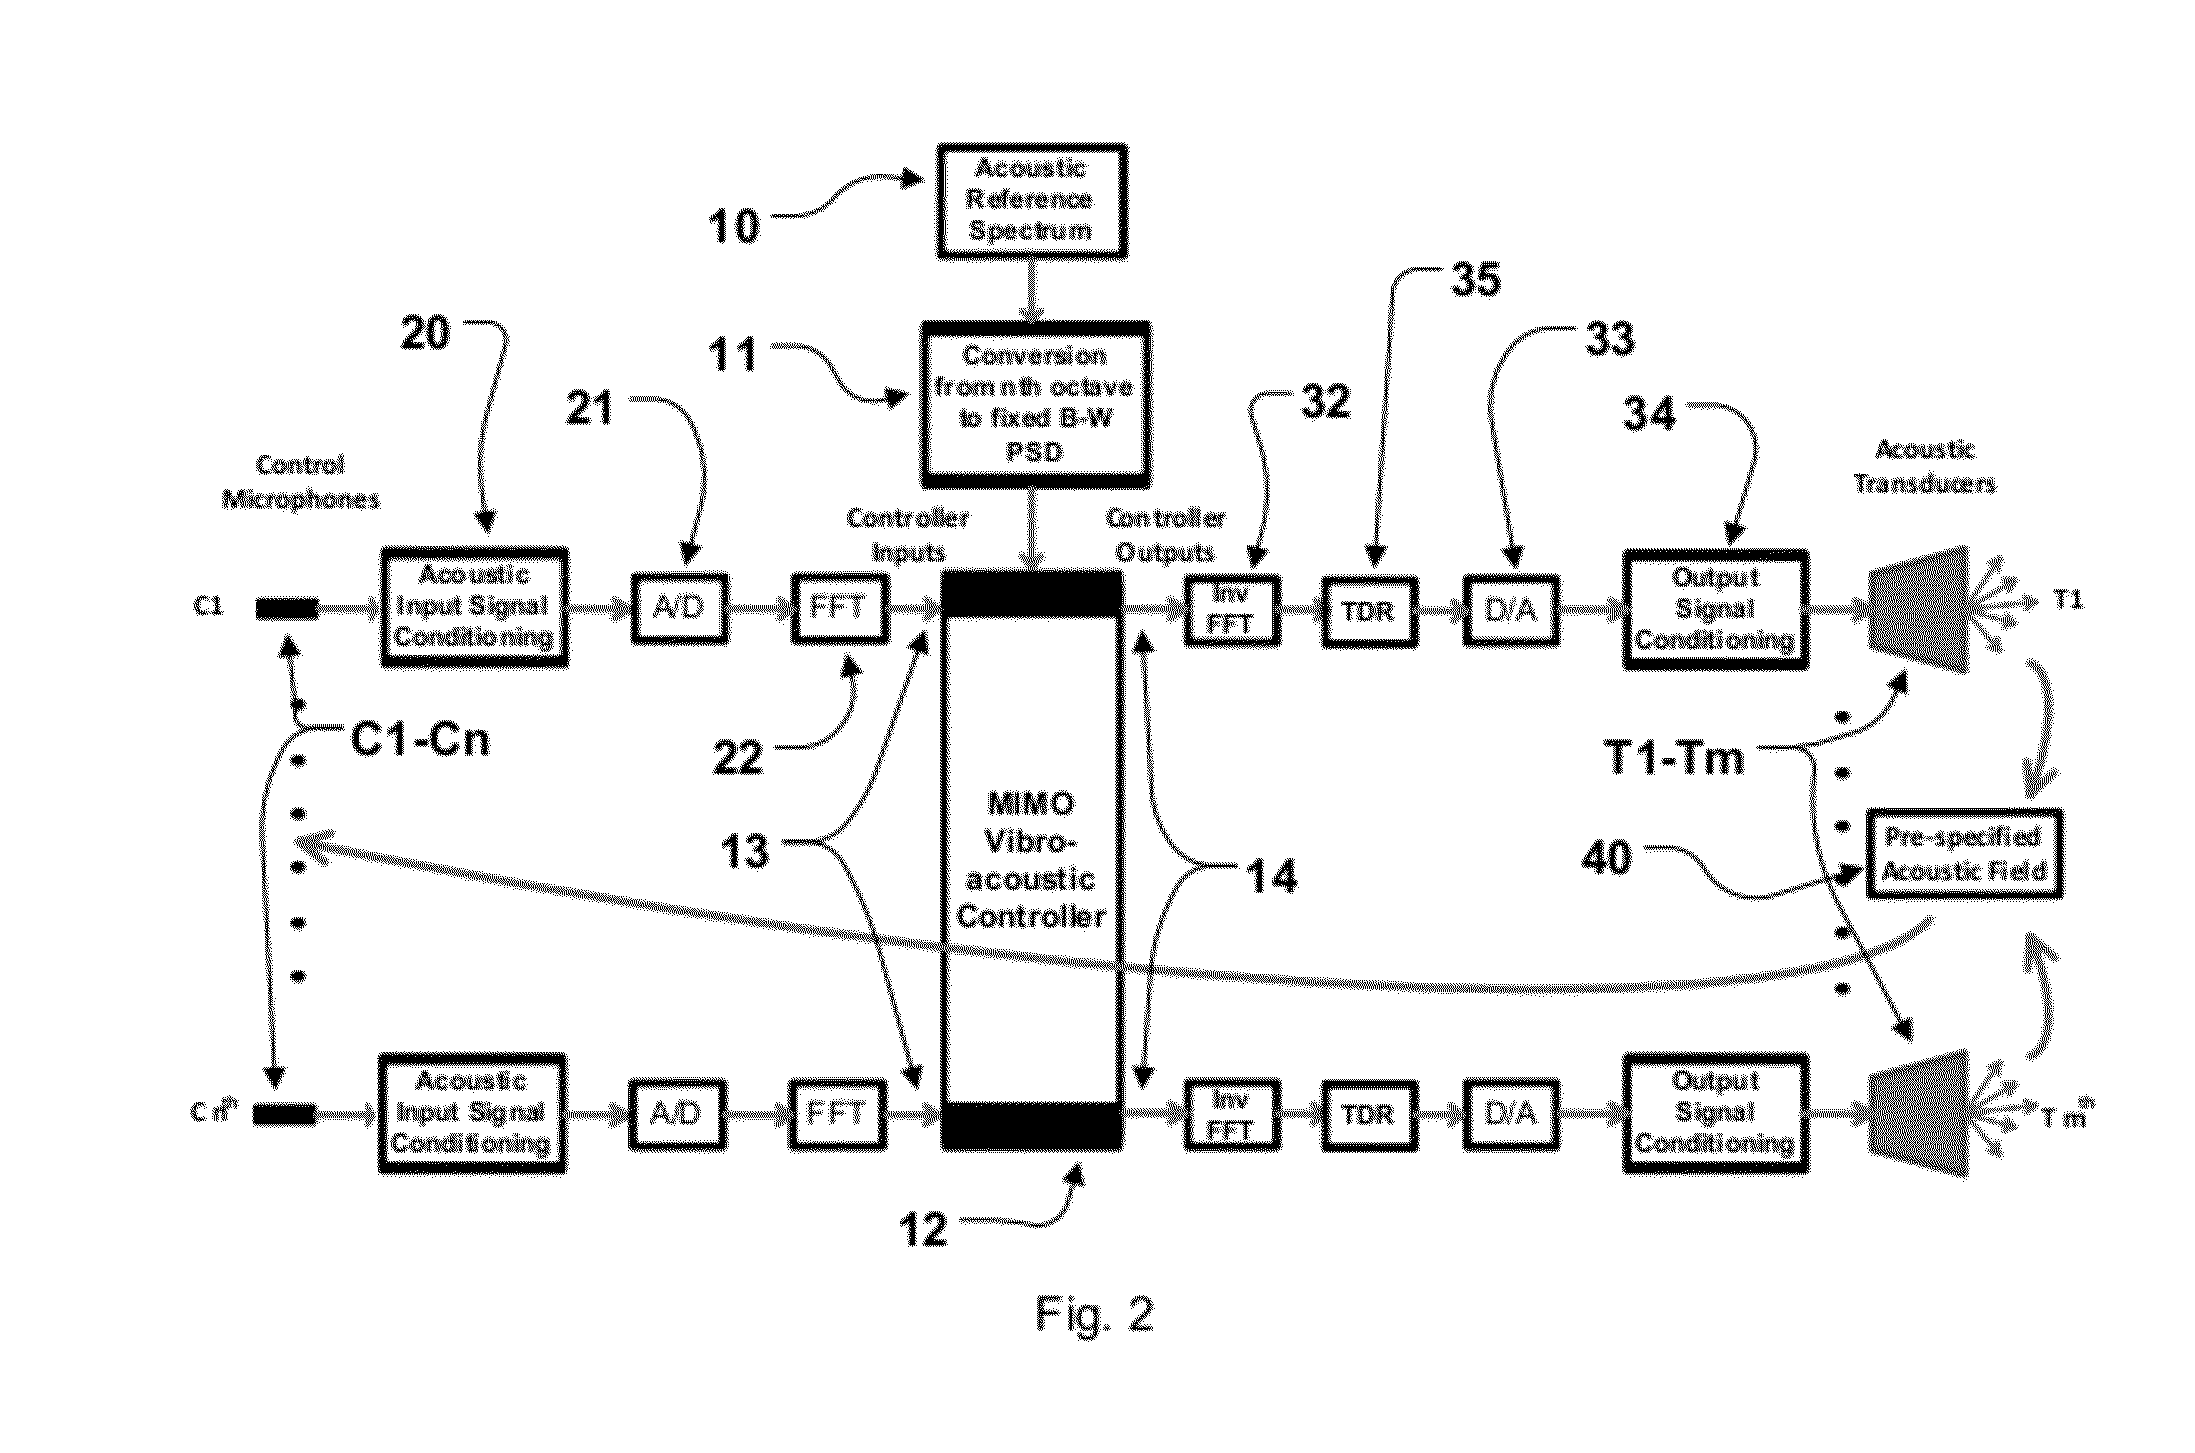 Direct field acoustic testing system and method